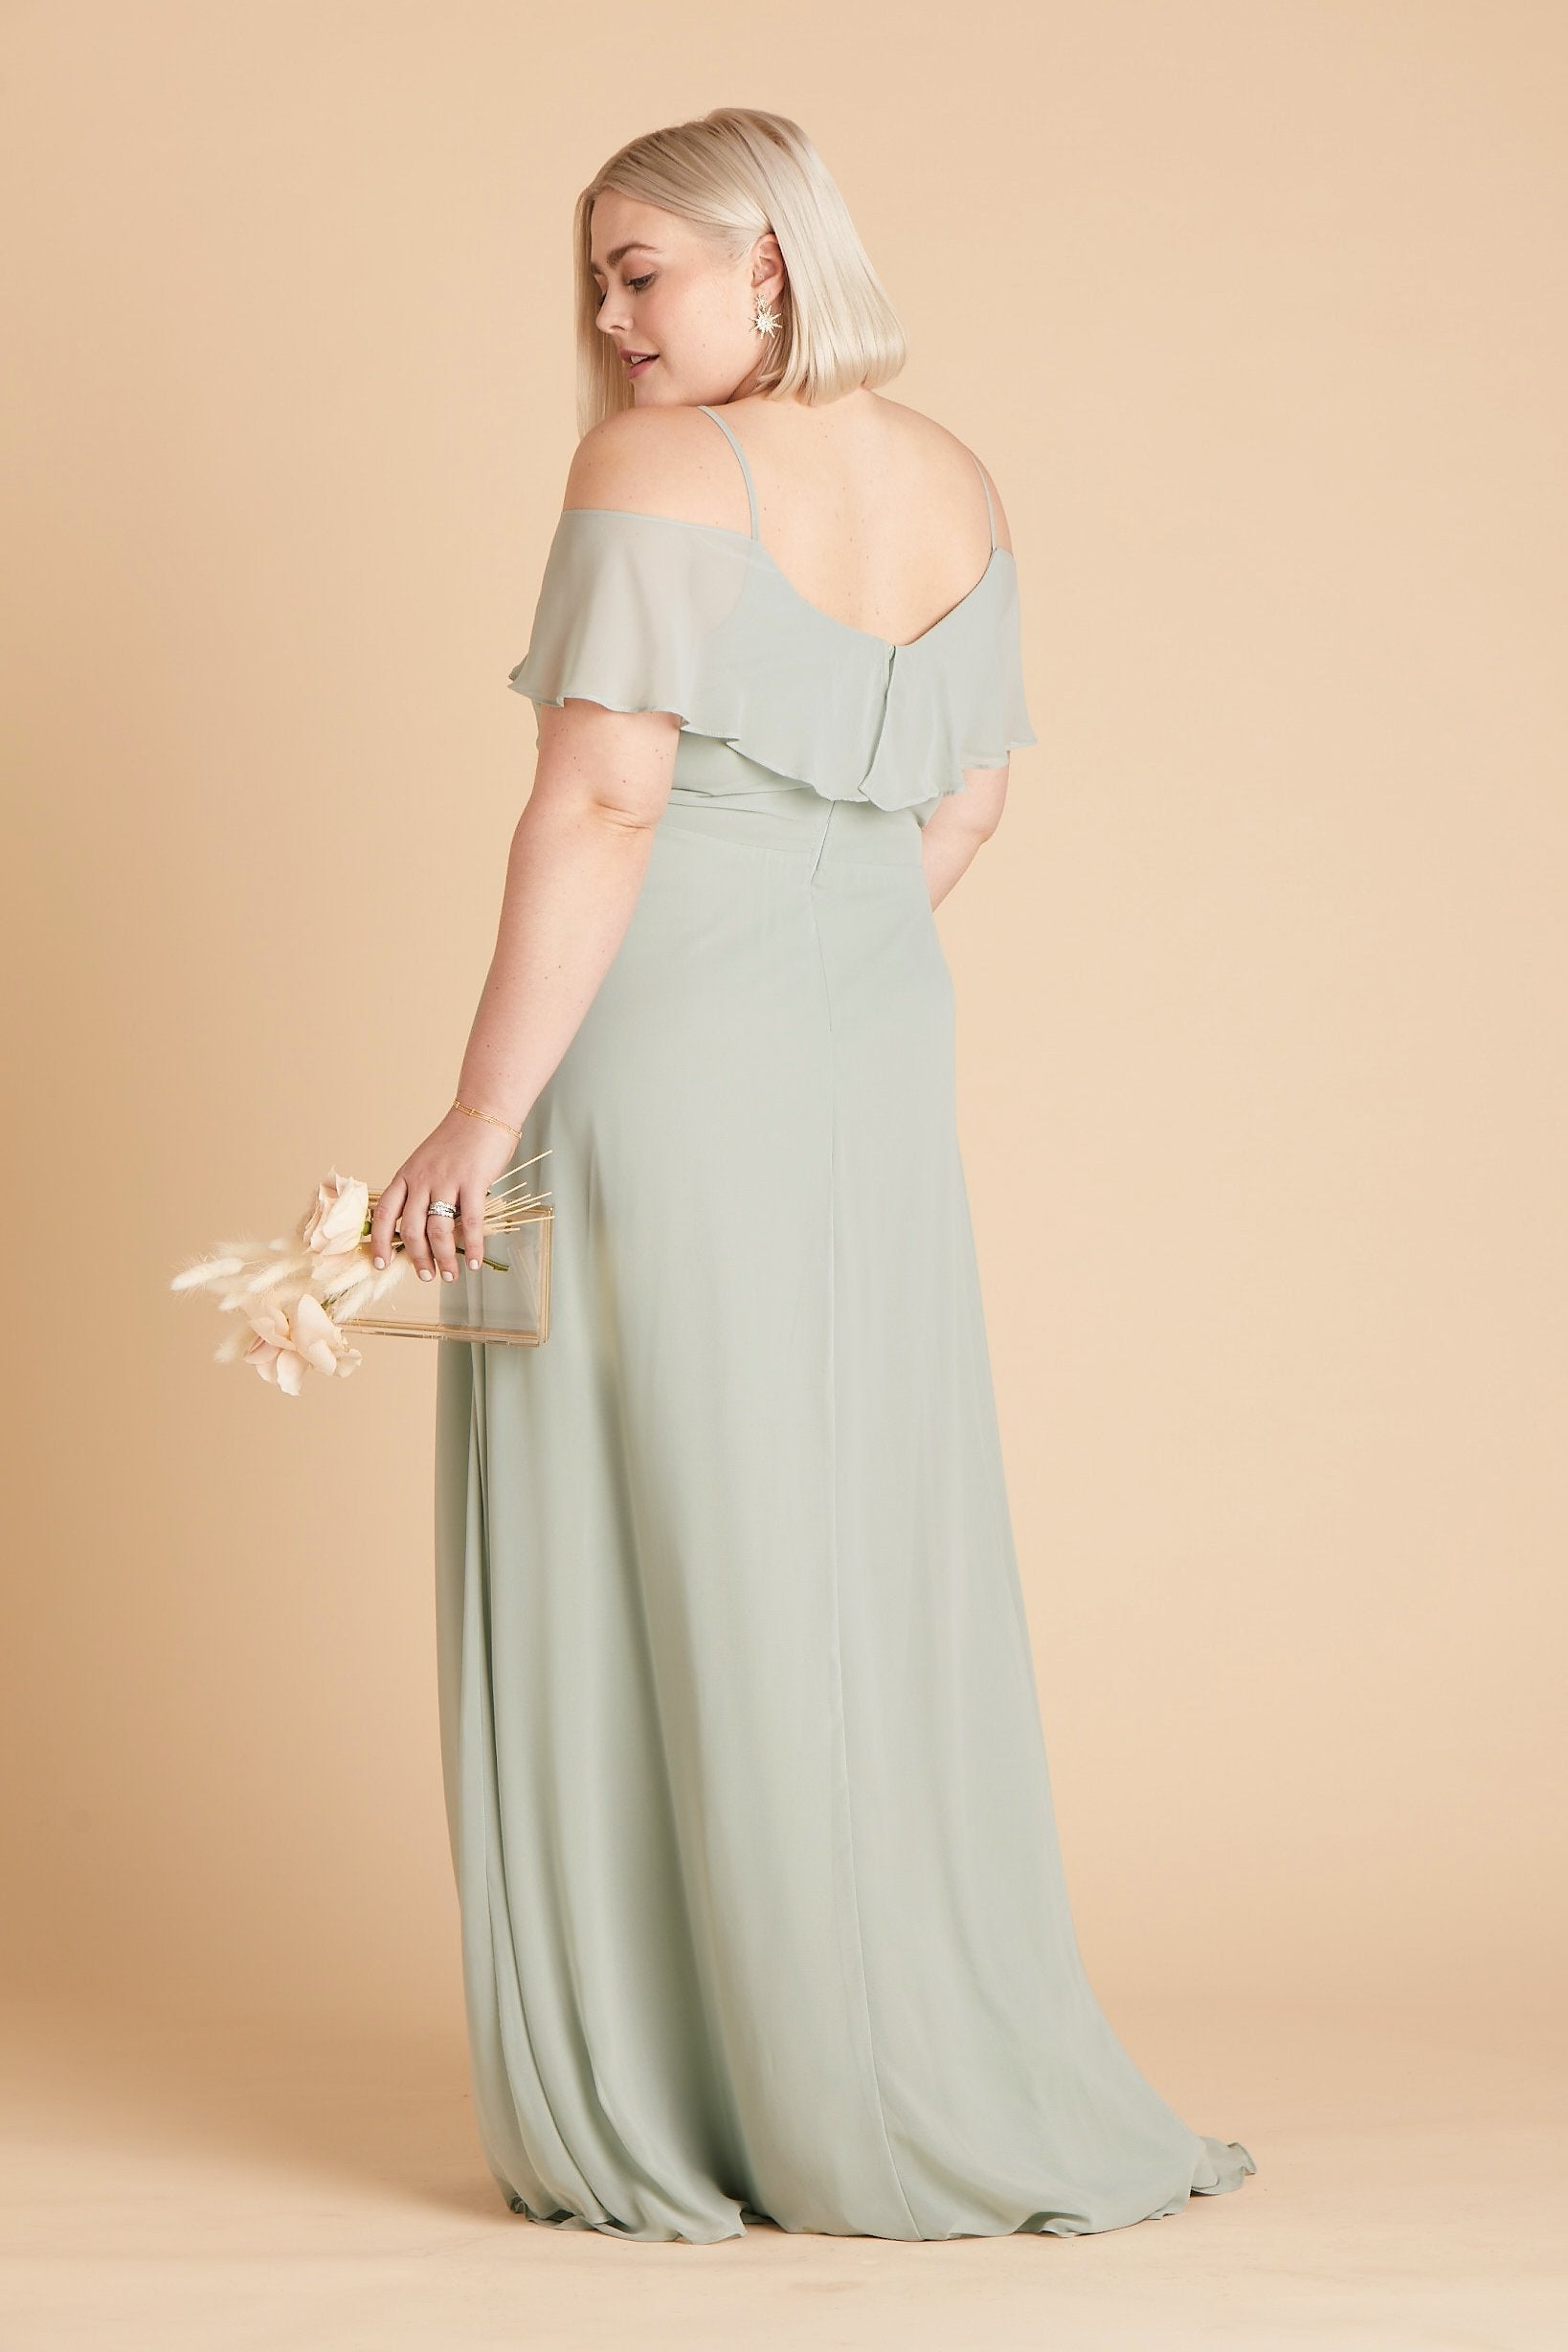 Jane convertible plus size bridesmaid dress in sage green chiffon by Birdy Grey, back view